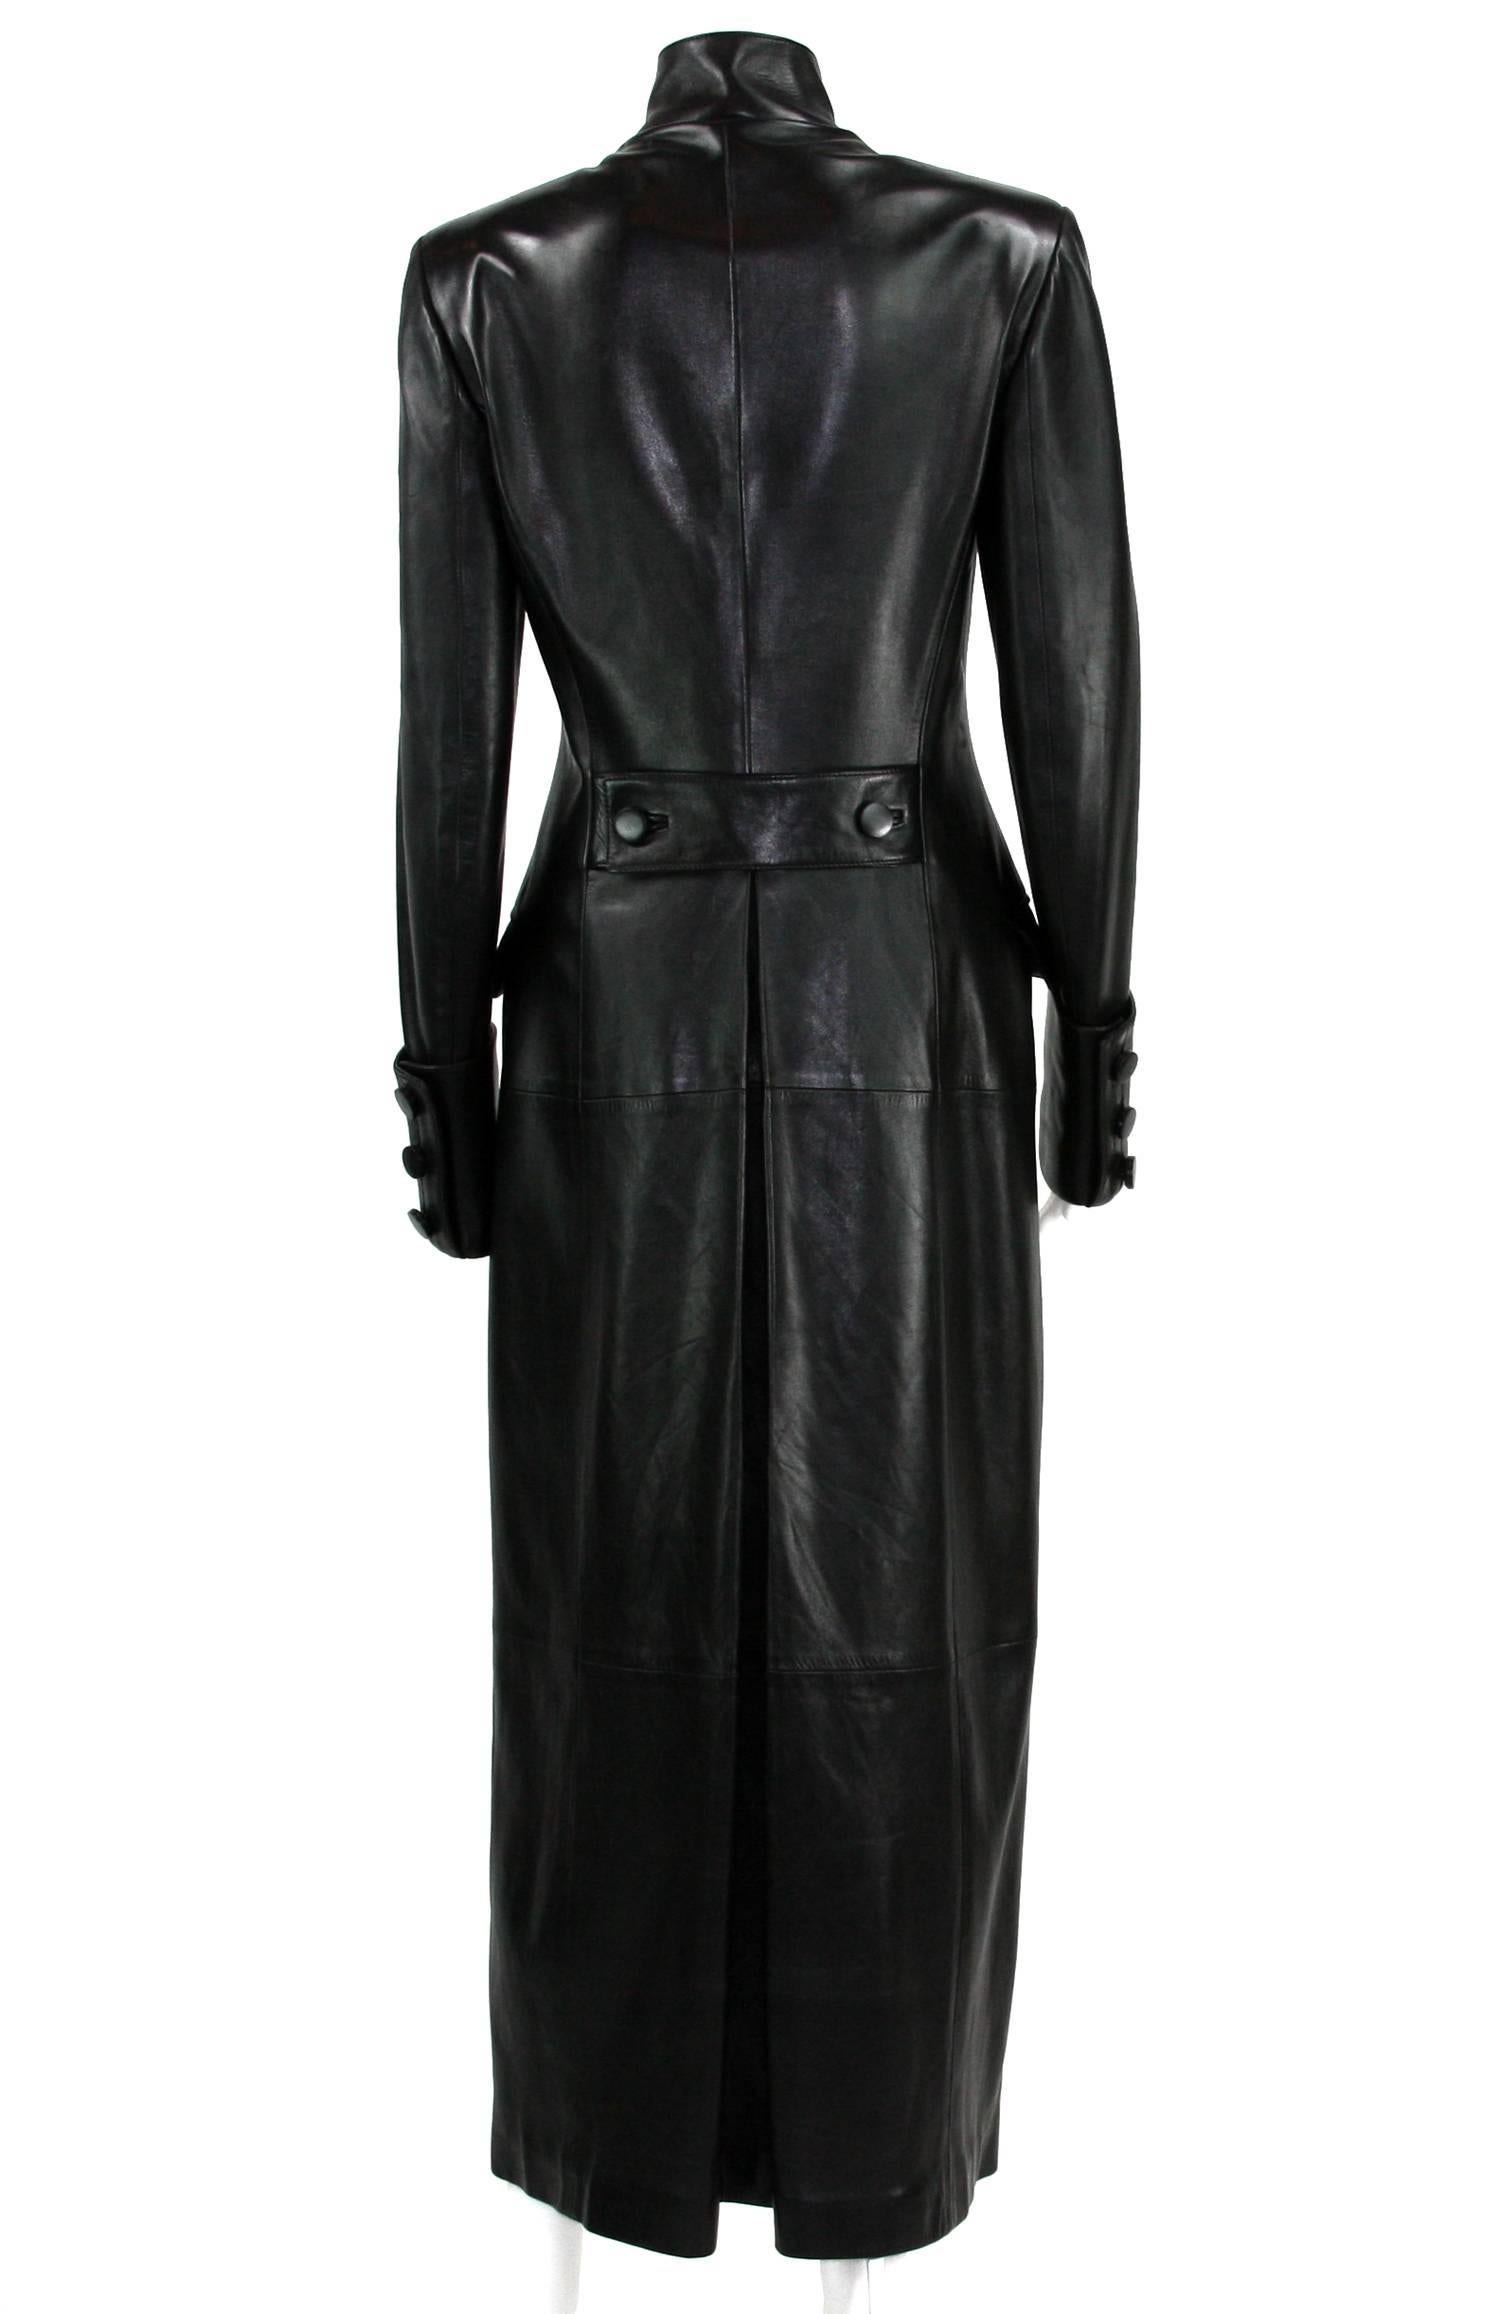 Tom Ford for Yves Saint Laurent F/W 2001 Black Leather Long Military ...